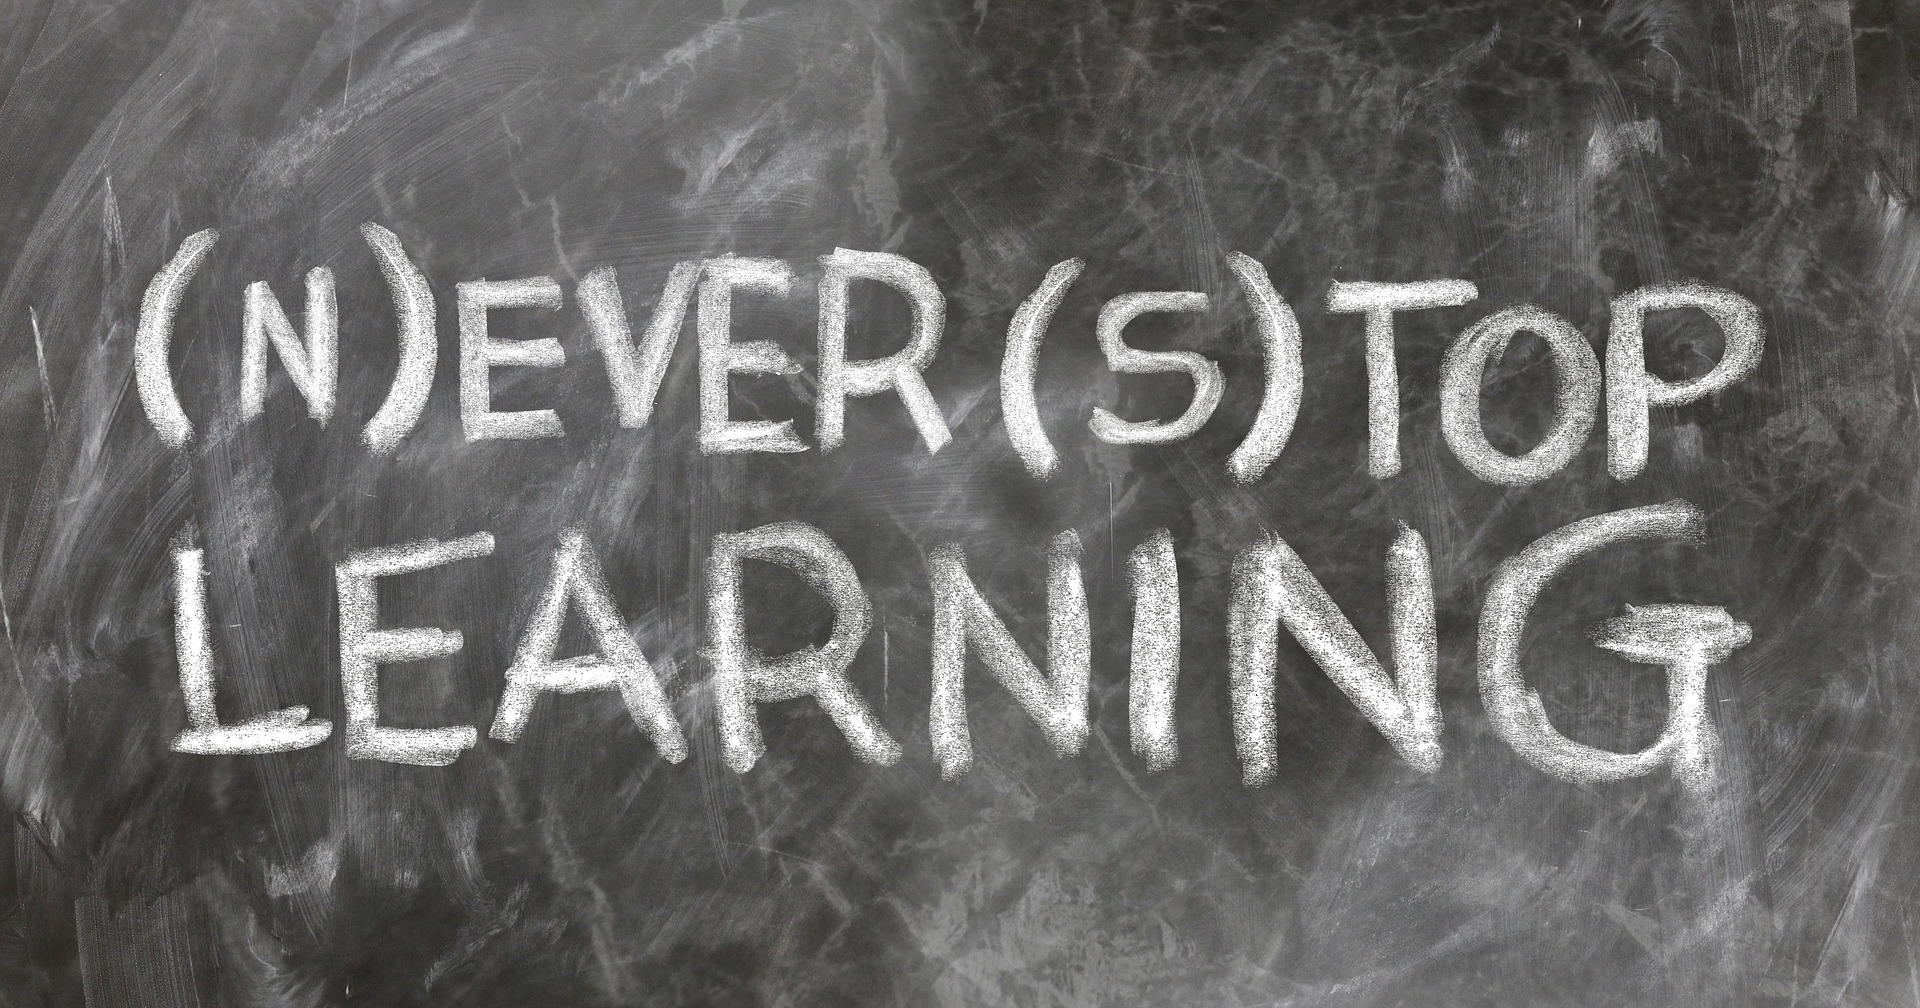 a blackboard showing the text - "never stop learning", Online teaching, Online Tutor, Online trainer, best practices for online teaching 